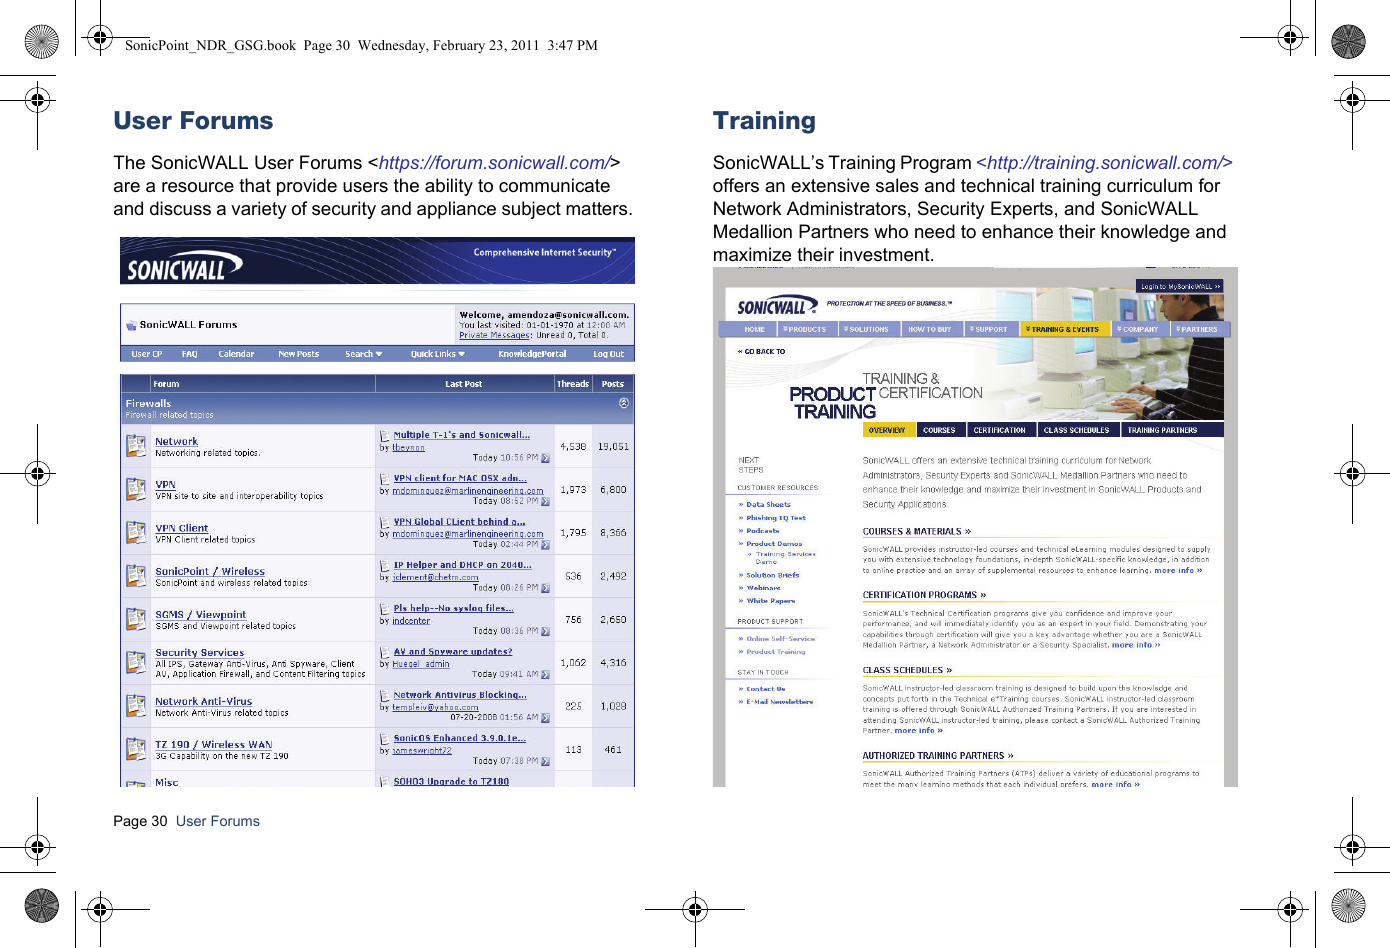 Page 30  User Forums  User ForumsThe SonicWALL User Forums &lt;https://forum.sonicwall.com/&gt; are a resource that provide users the ability to communicate and discuss a variety of security and appliance subject matters. TrainingSonicWALL’s Training Program &lt;http://training.sonicwall.com/&gt; offers an extensive sales and technical training curriculum for Network Administrators, Security Experts, and SonicWALL Medallion Partners who need to enhance their knowledge and maximize their investment. SonicPoint_NDR_GSG.book  Page 30  Wednesday, February 23, 2011  3:47 PM